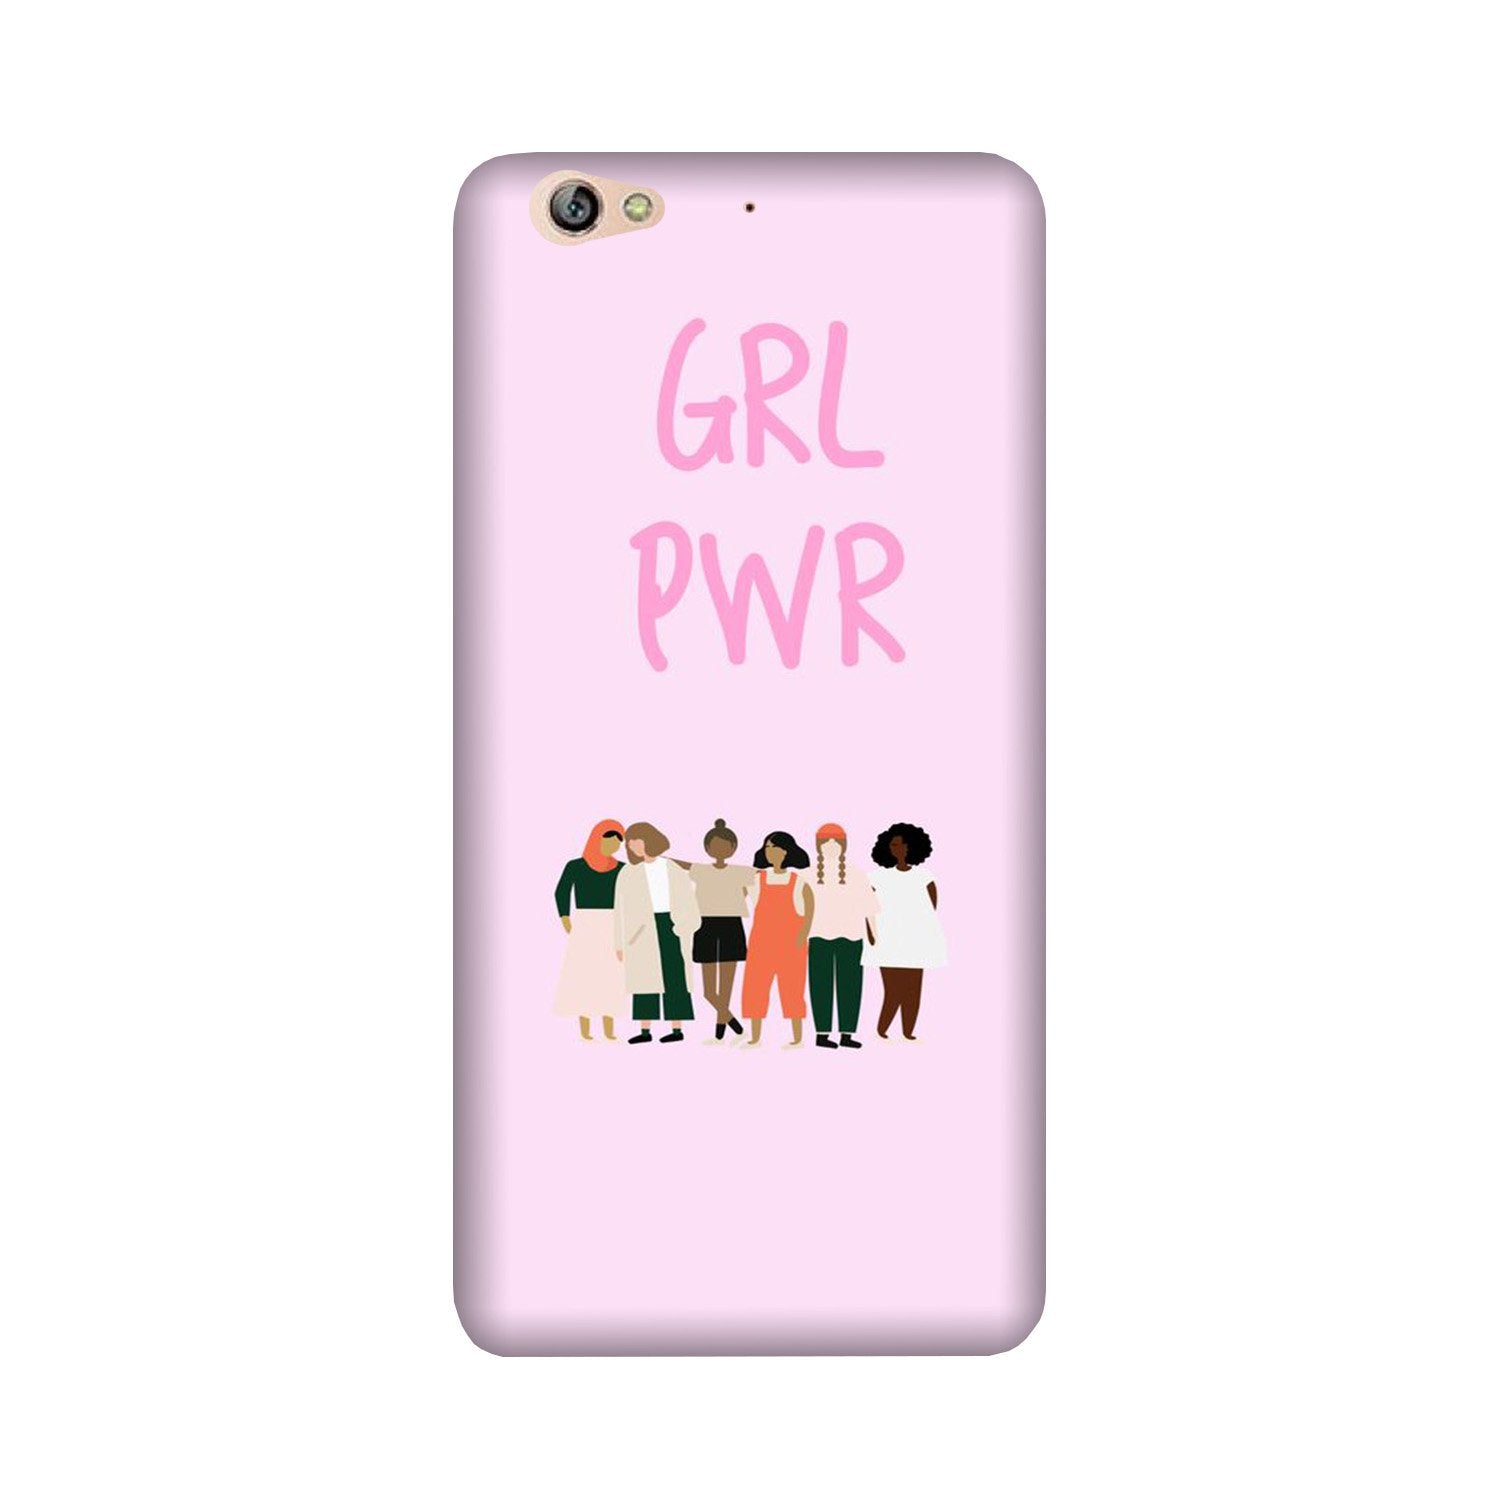 Girl Power Case for Gionee S6 (Design No. 267)